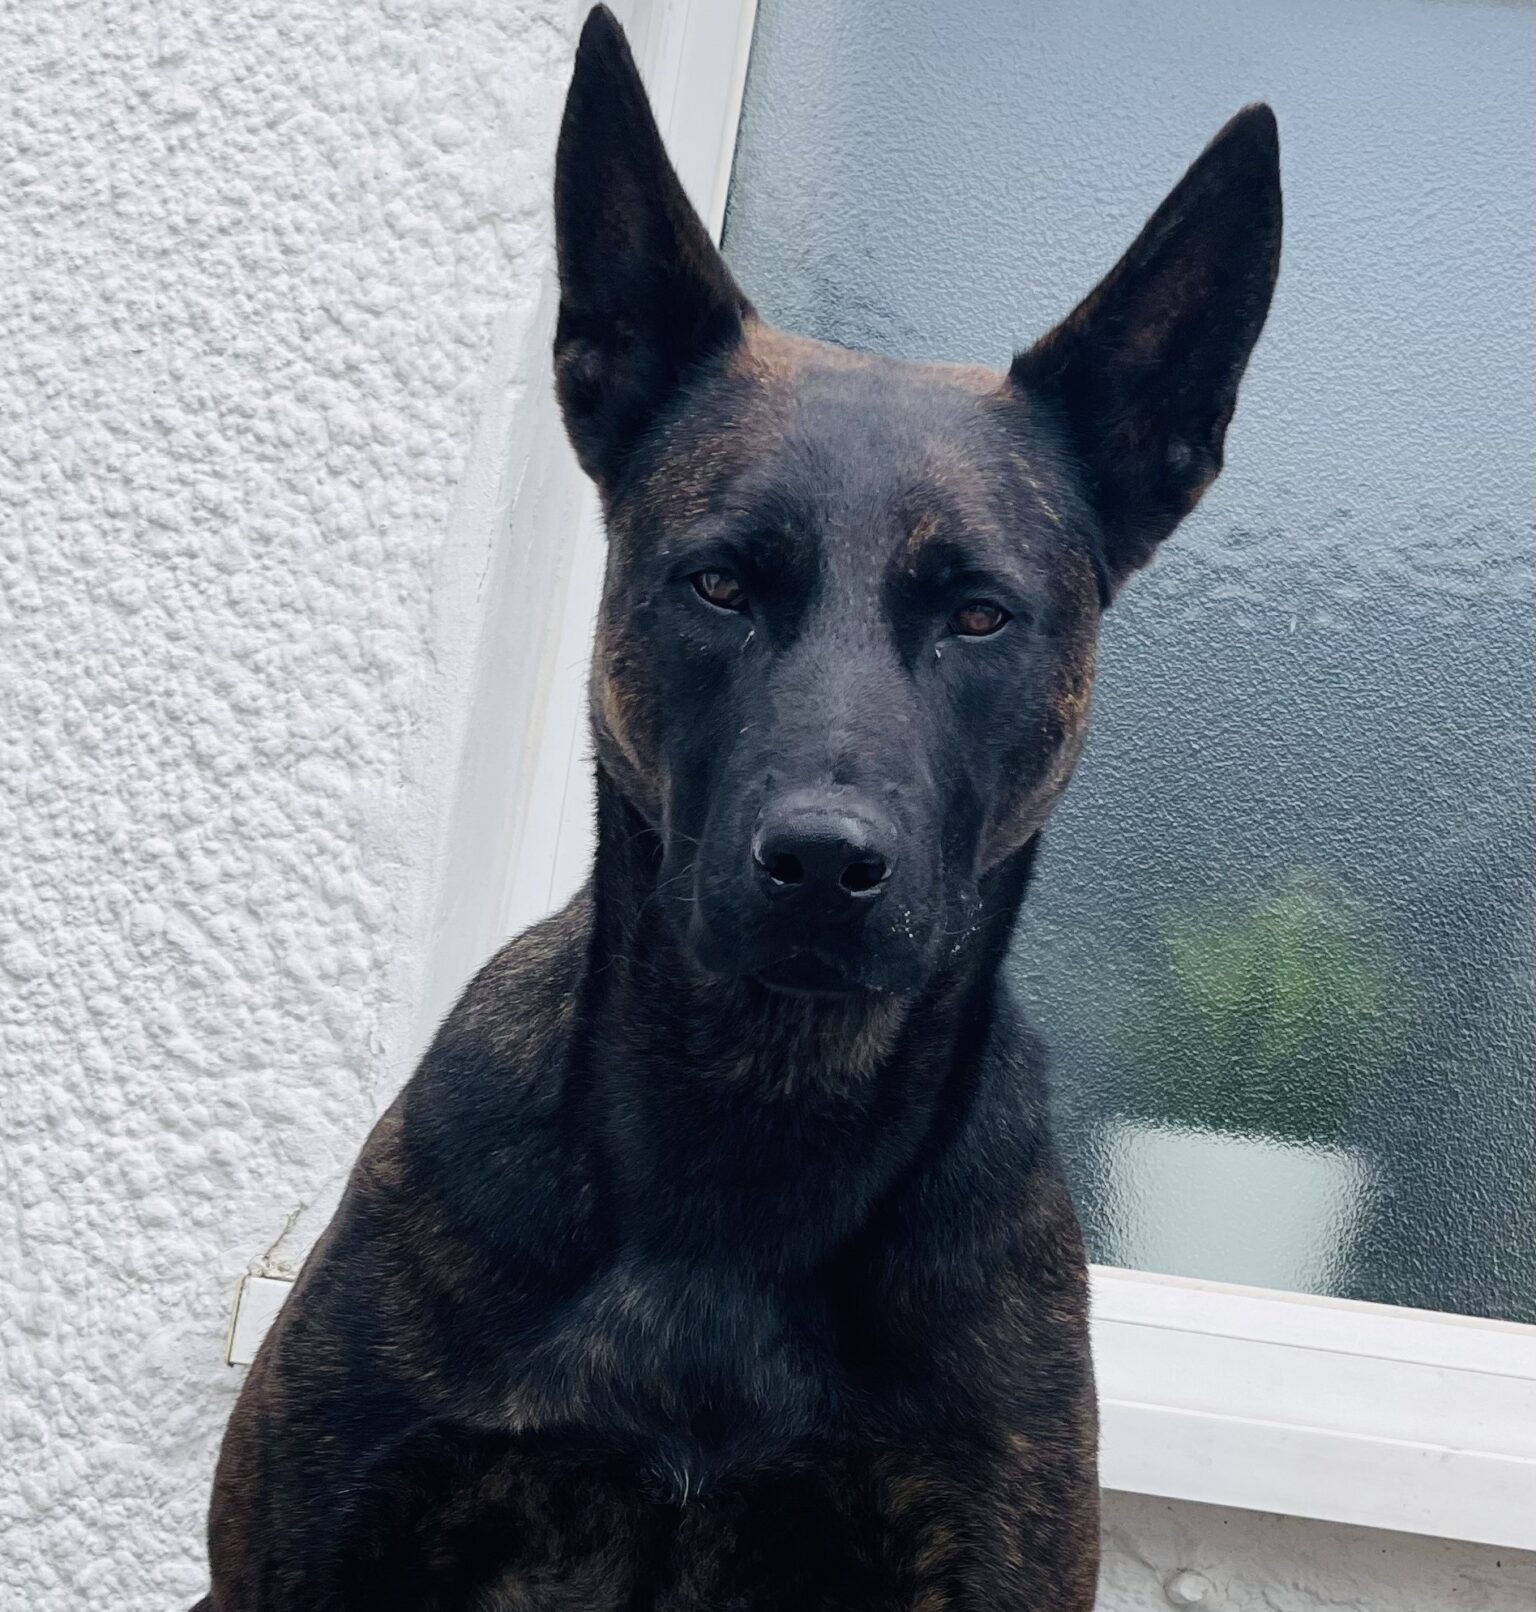 Vixen the crime fighting dog goes viral on social media for his scarry looks and stare.